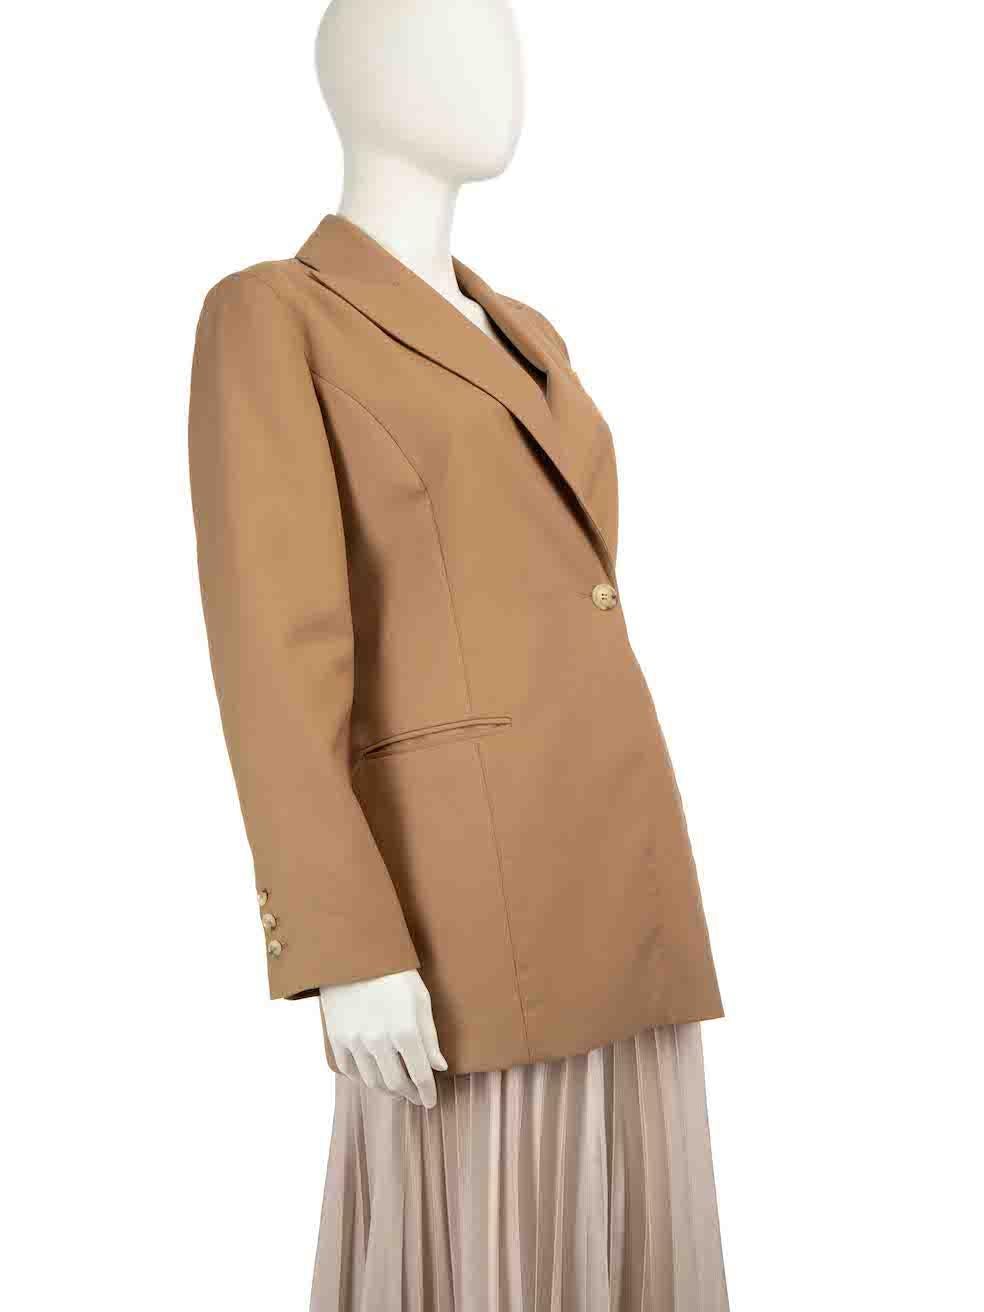 CONDITION is Very good. Hardly any visible wear to the blazer is evident on this used ANNA QUAN designer resale item.
 
 
 
 Details
 
 
 Brown
 
 Polyester
 
 Blazer jacket
 
 Mid length
 
 Shoulder pads
 
 Button up fastening
 
 Long sleeves
 
